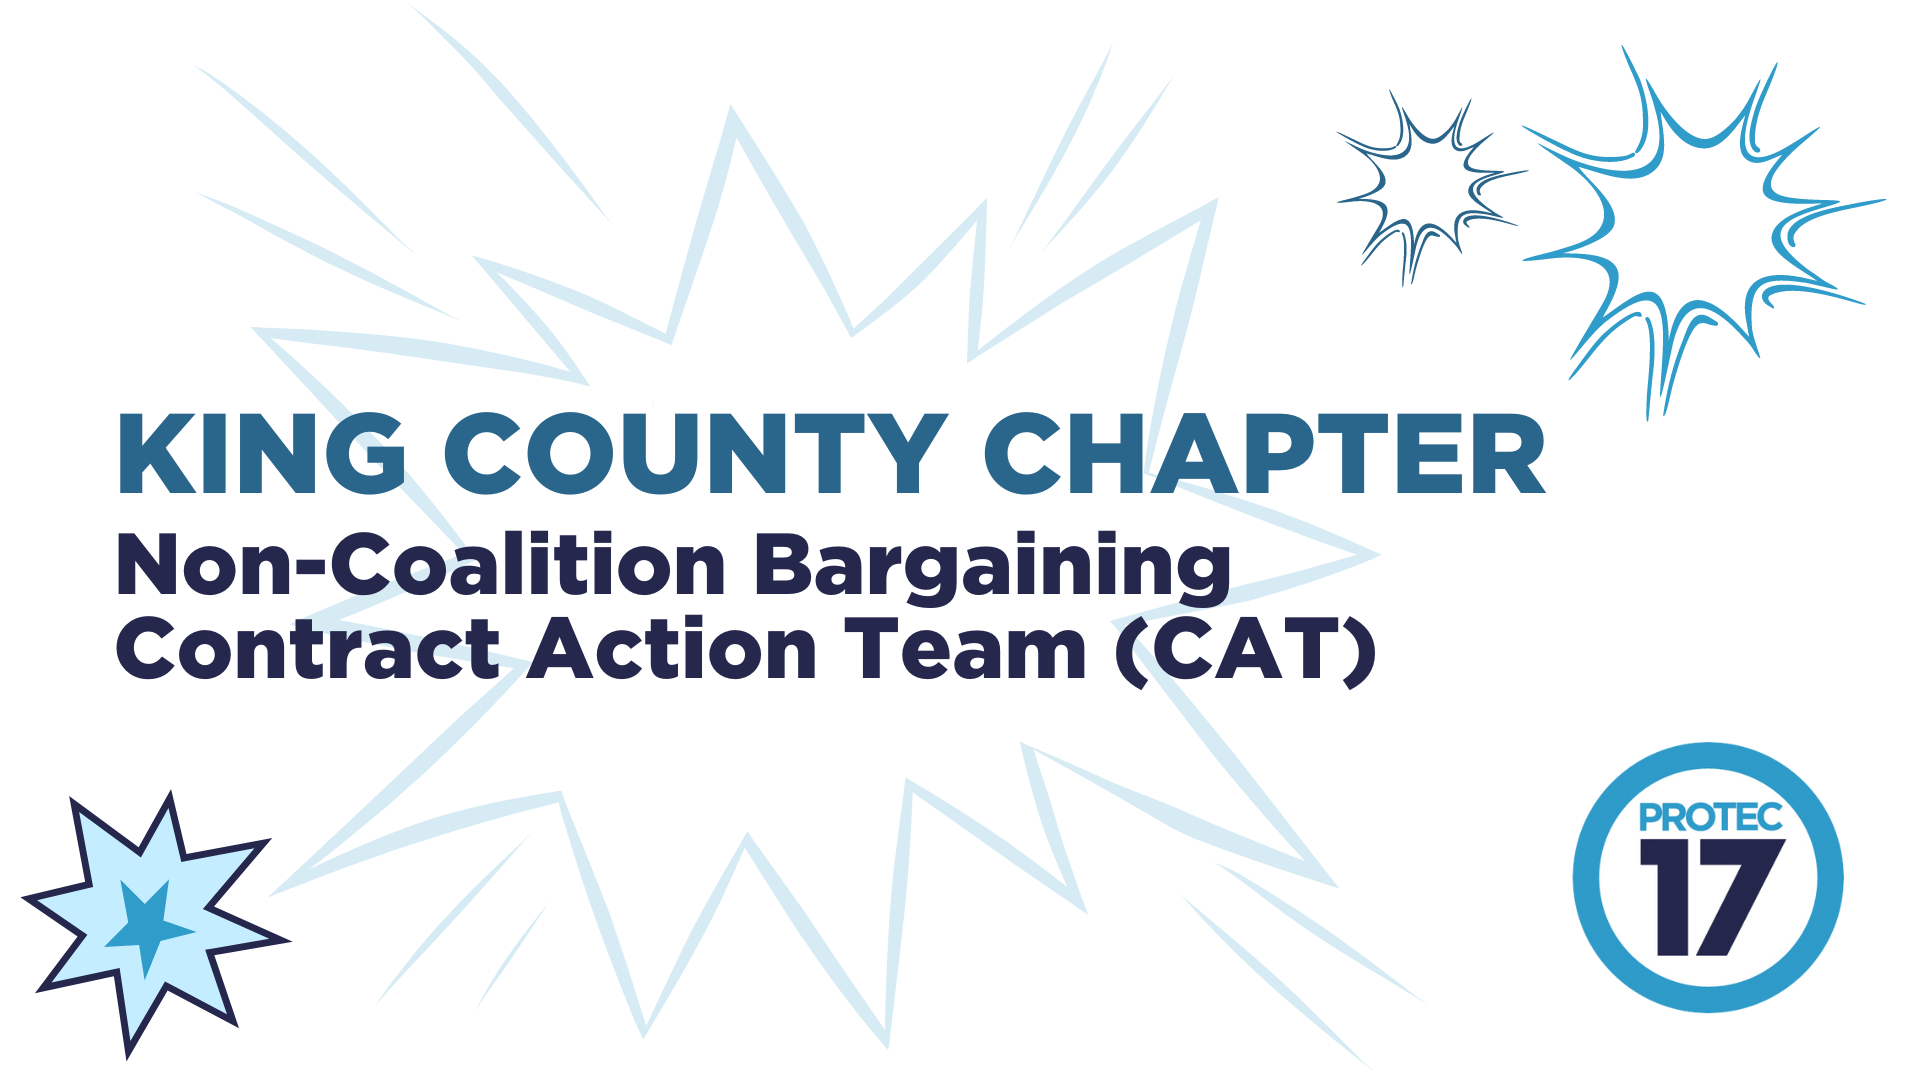 The text reads, "KING COUNTY CHAPTER | Non-Coalition Bargaining | Contract Action Team (CAT)" surrounding by various cartoon-like superhero-inspired graphics. There are varying explosion images in the corners of the image. The PROTEC17 logo is in the bottom right.